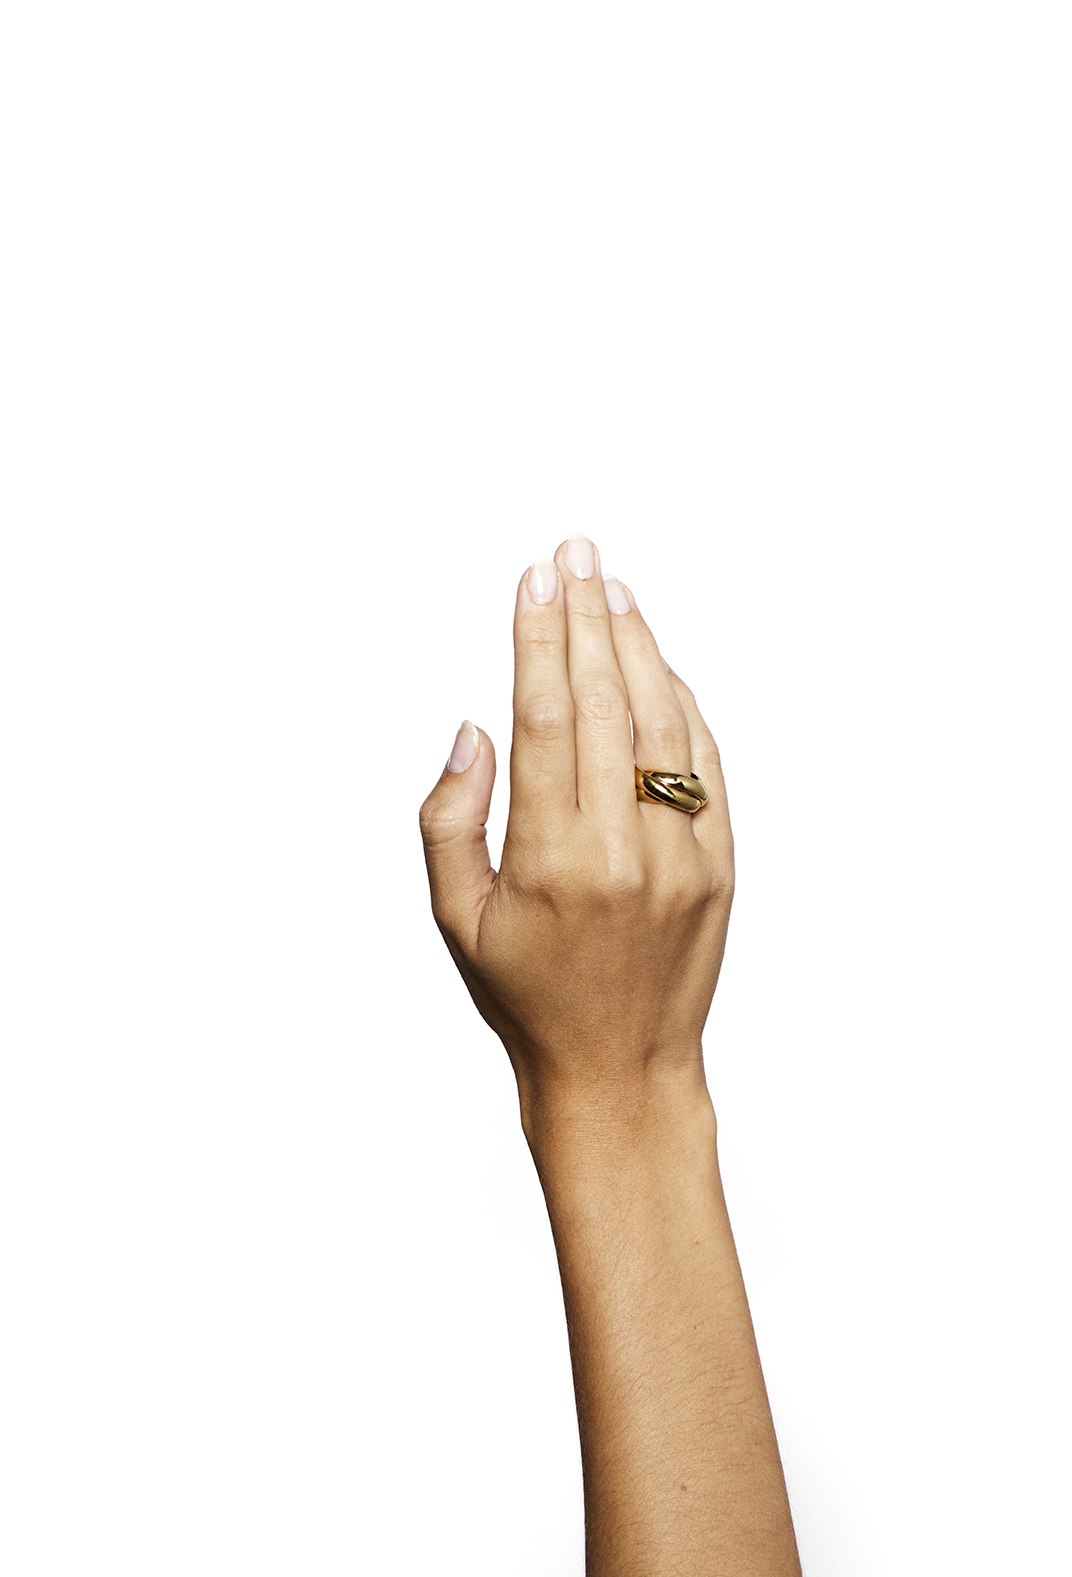 The Sofie Ring in gold or silver| LIÉ STUDIO